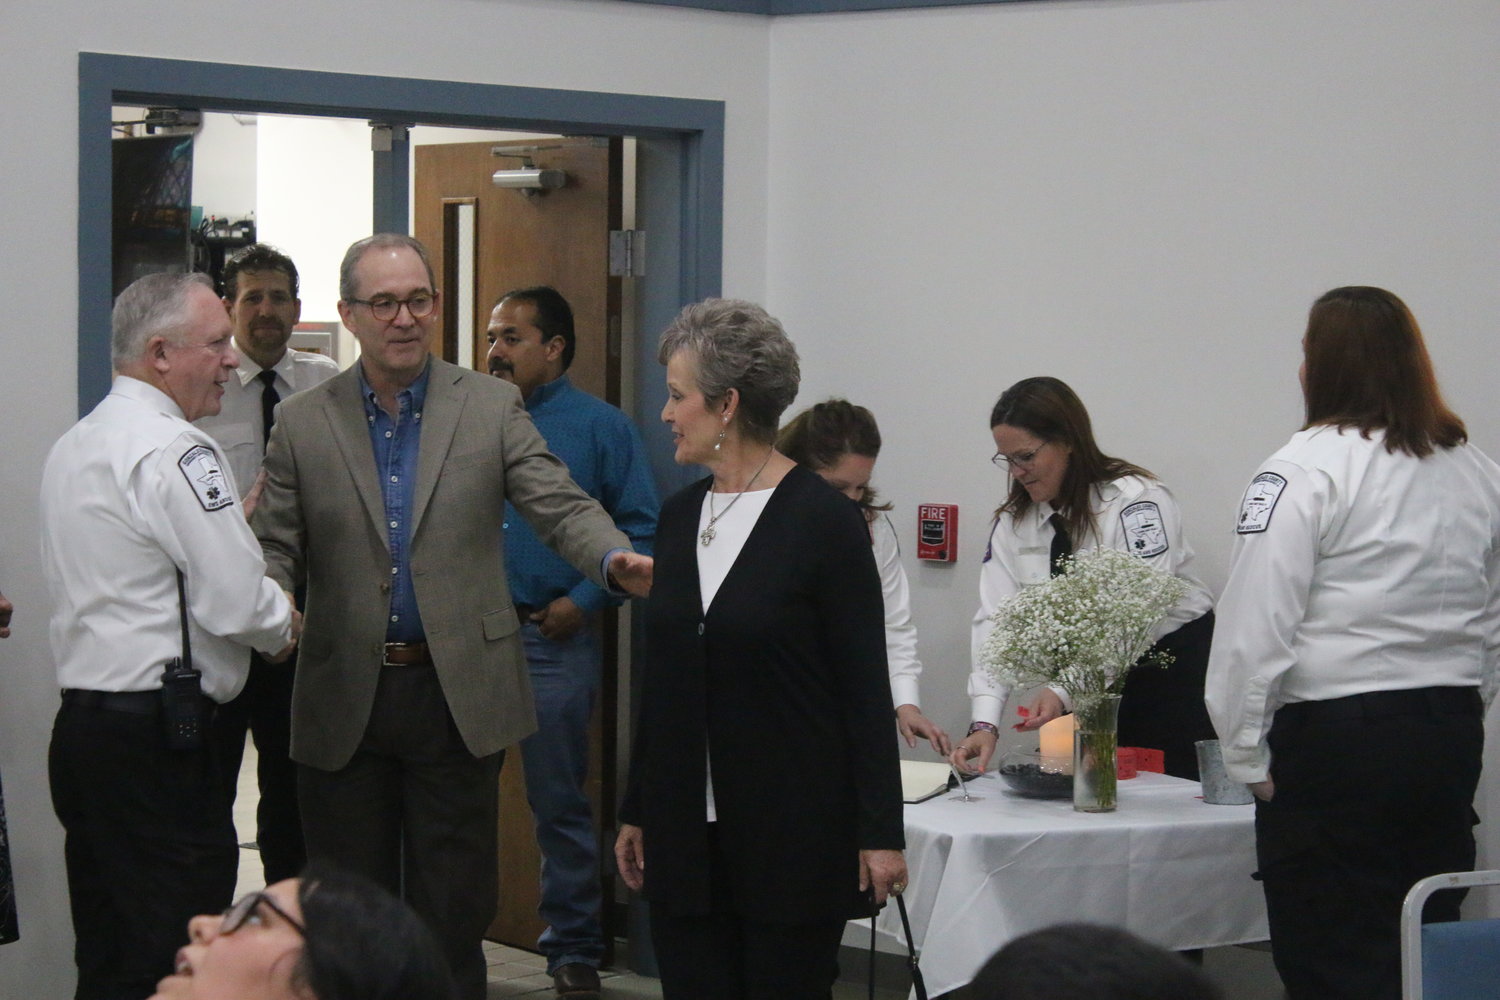 Gonzales County Emergency Services District #1 executive director Eddie Callendar Jr., left, welcomes board vice president Dr. Commie Hisey, center, to the GCESD’s first-ever banquet on Tuesday, March 29. The agency officially celebrated its second anniversary on March 30.